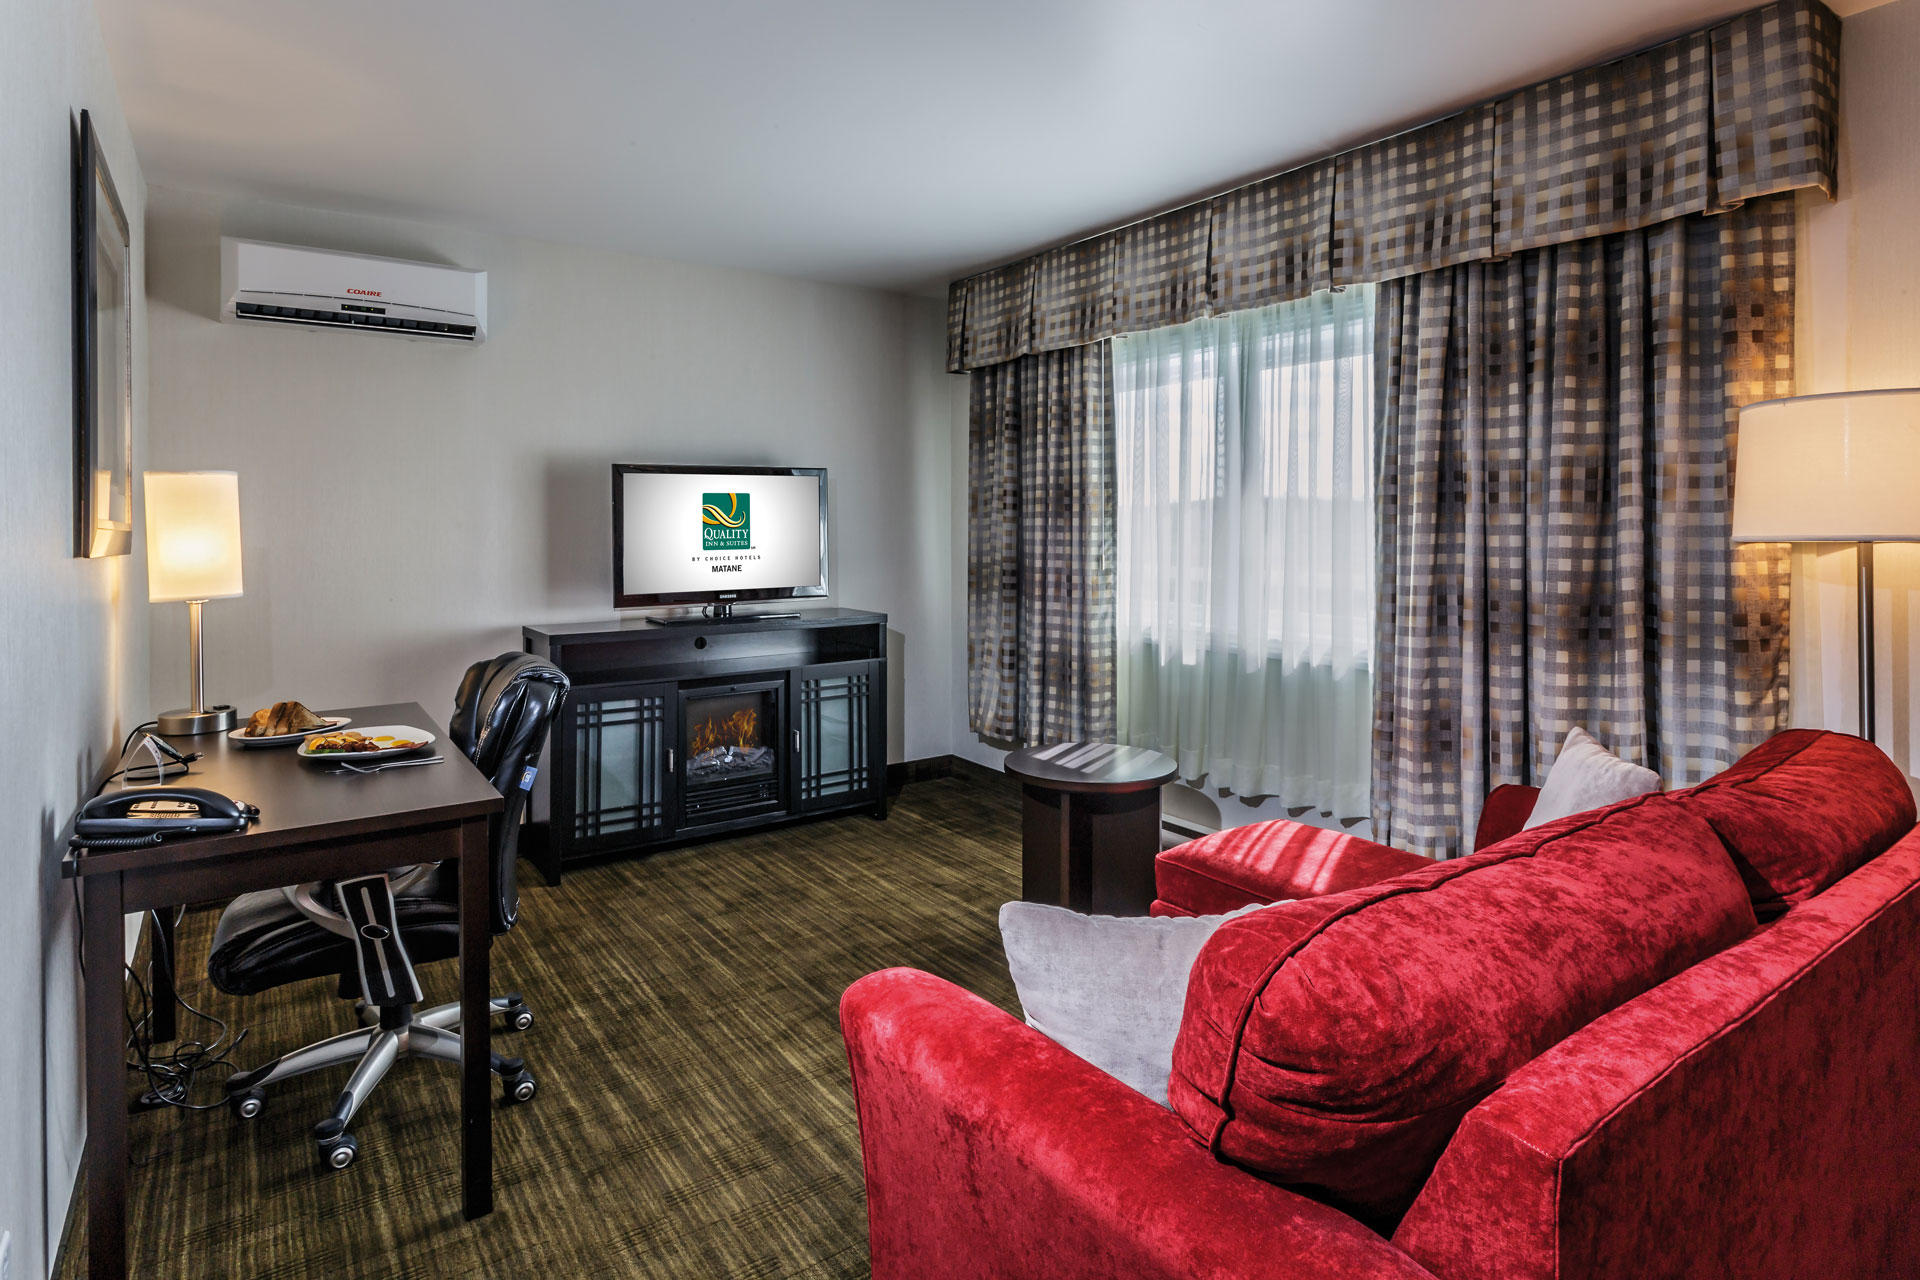 Our executive suites offer the perfect place for a romantic weekend or business trip.